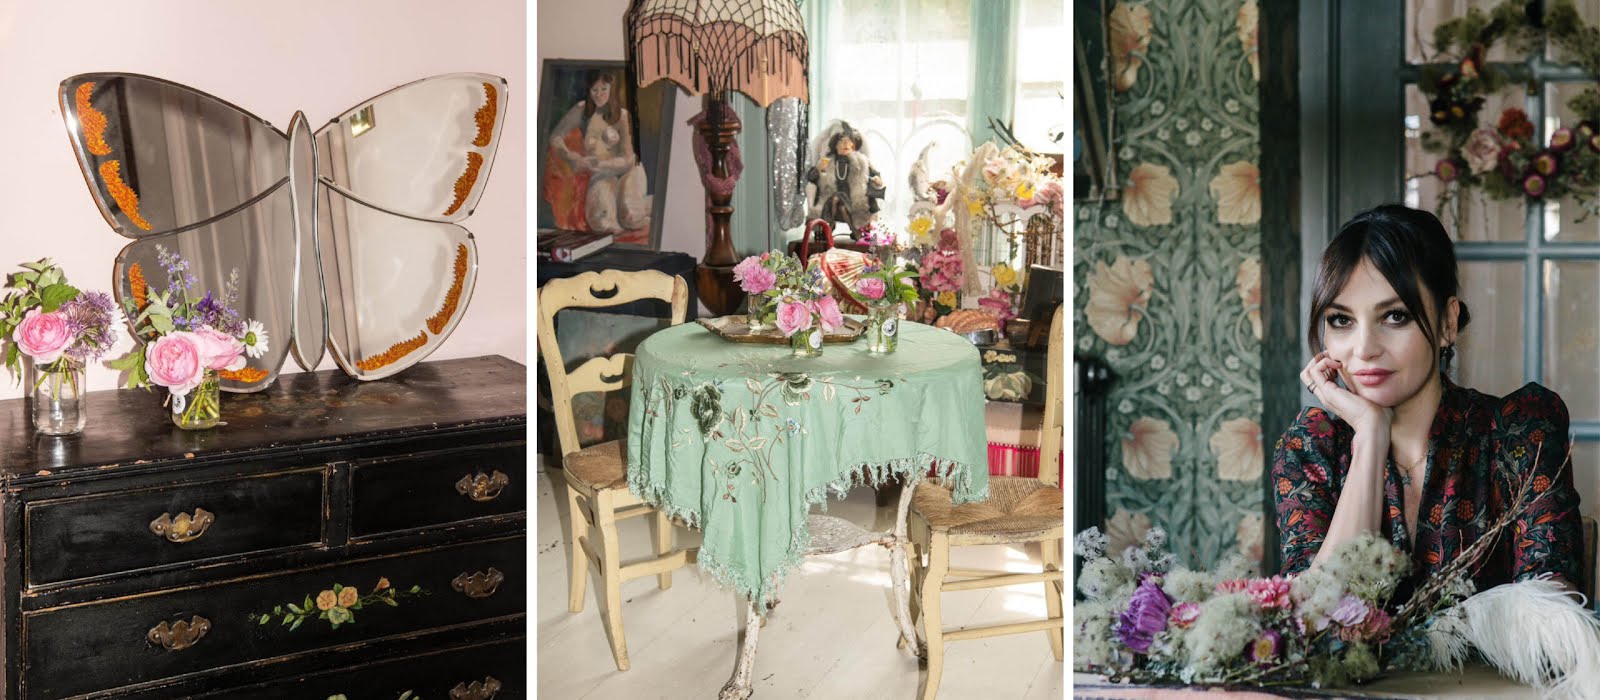 Vintage lover Pearl Lowe shares her tips for finding your own second-hand treasures